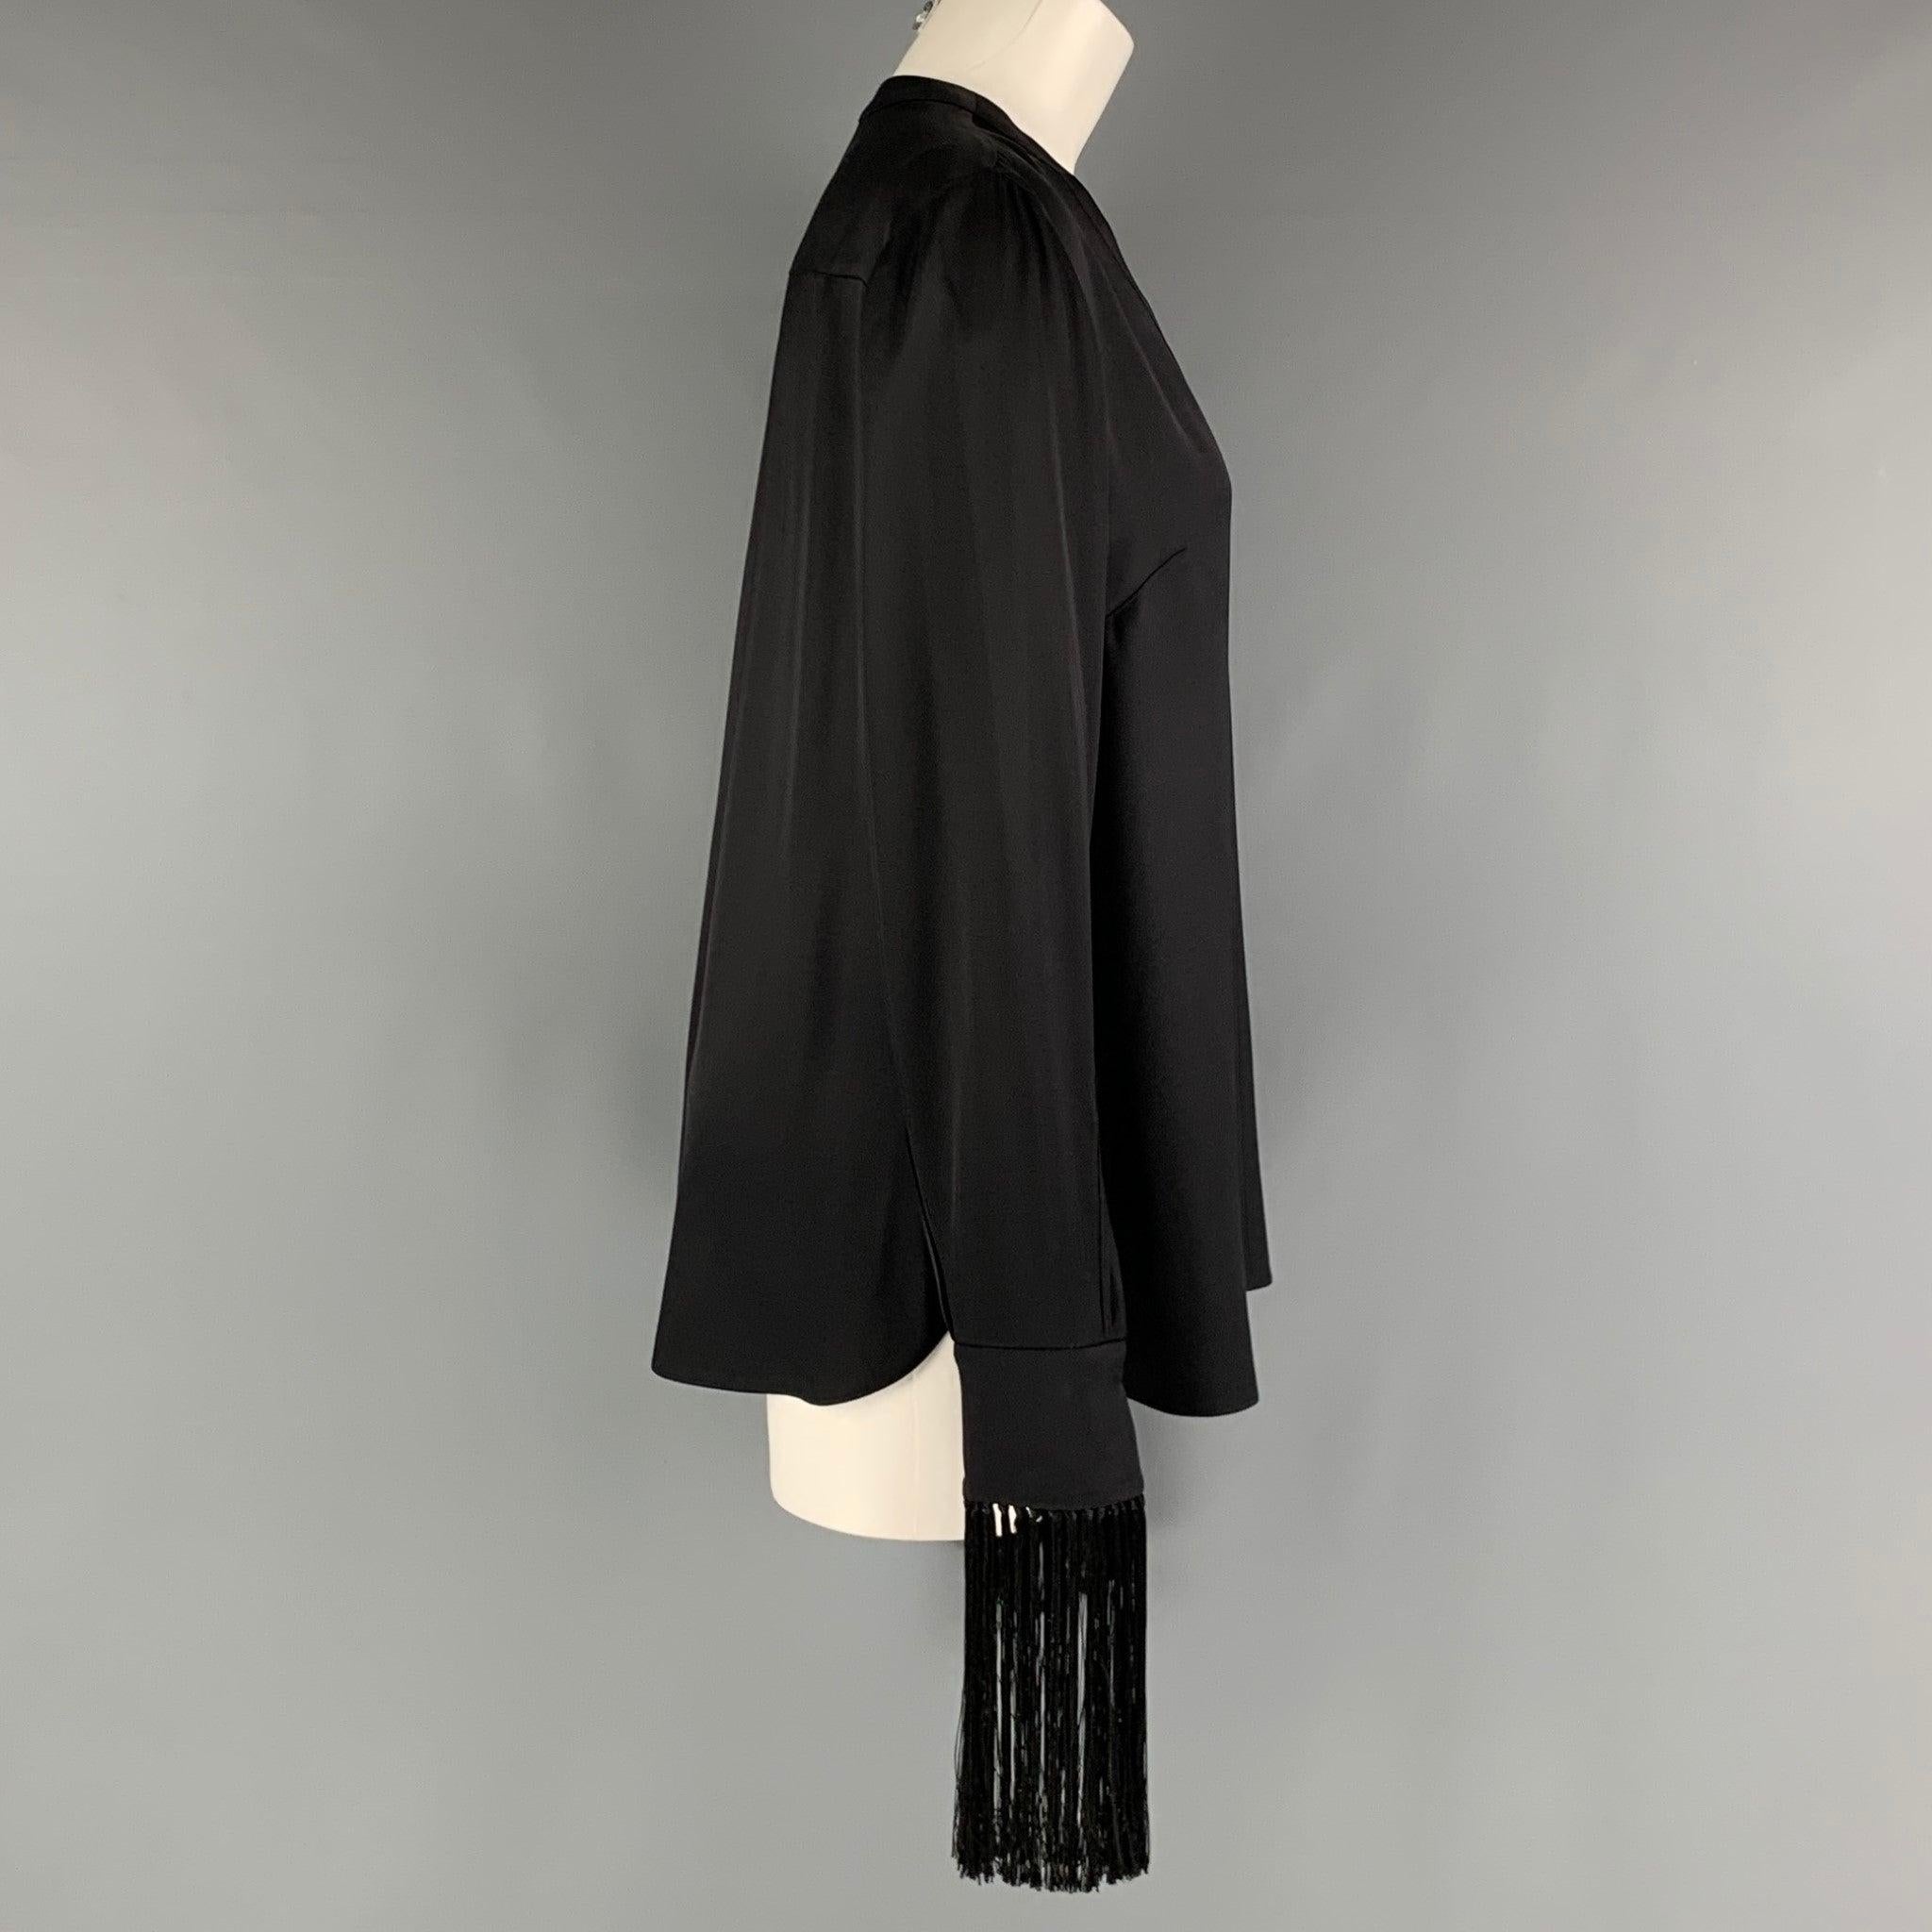 ALEXANDER MCQUEEN shirt comes in a black silk woven material featuring open collar, fringe at sleeves and a button up closure. Made in Italy. Excellent Pre-Owned Condition.  

Marked:   40 

Measurements: 
 
Shoulder: 18 inches Bust: 42 inches